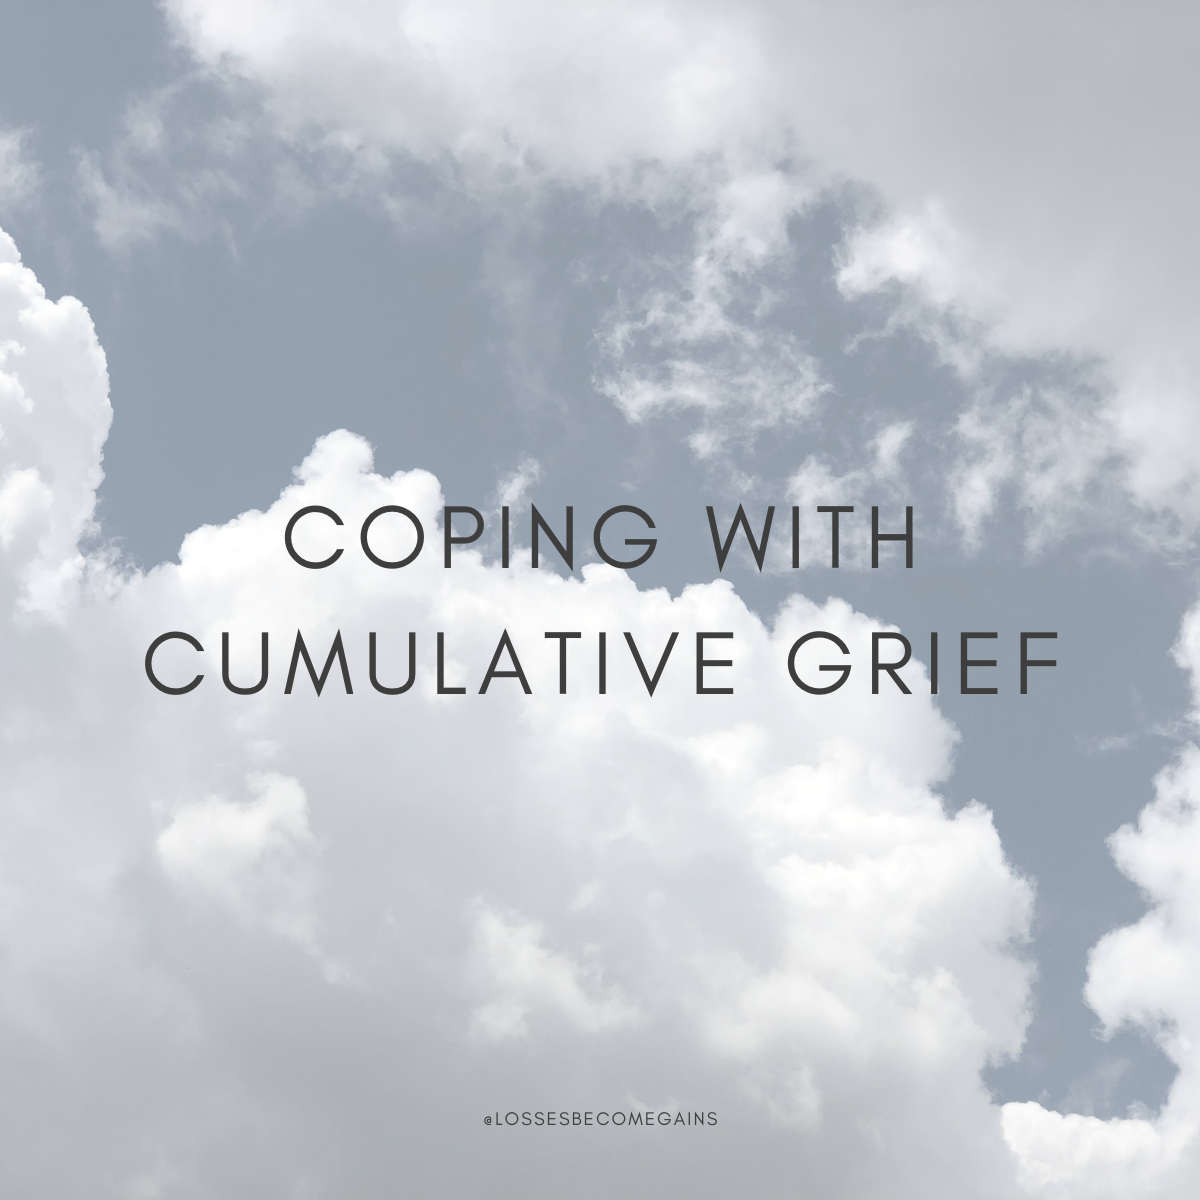 Coping with cumulative grief